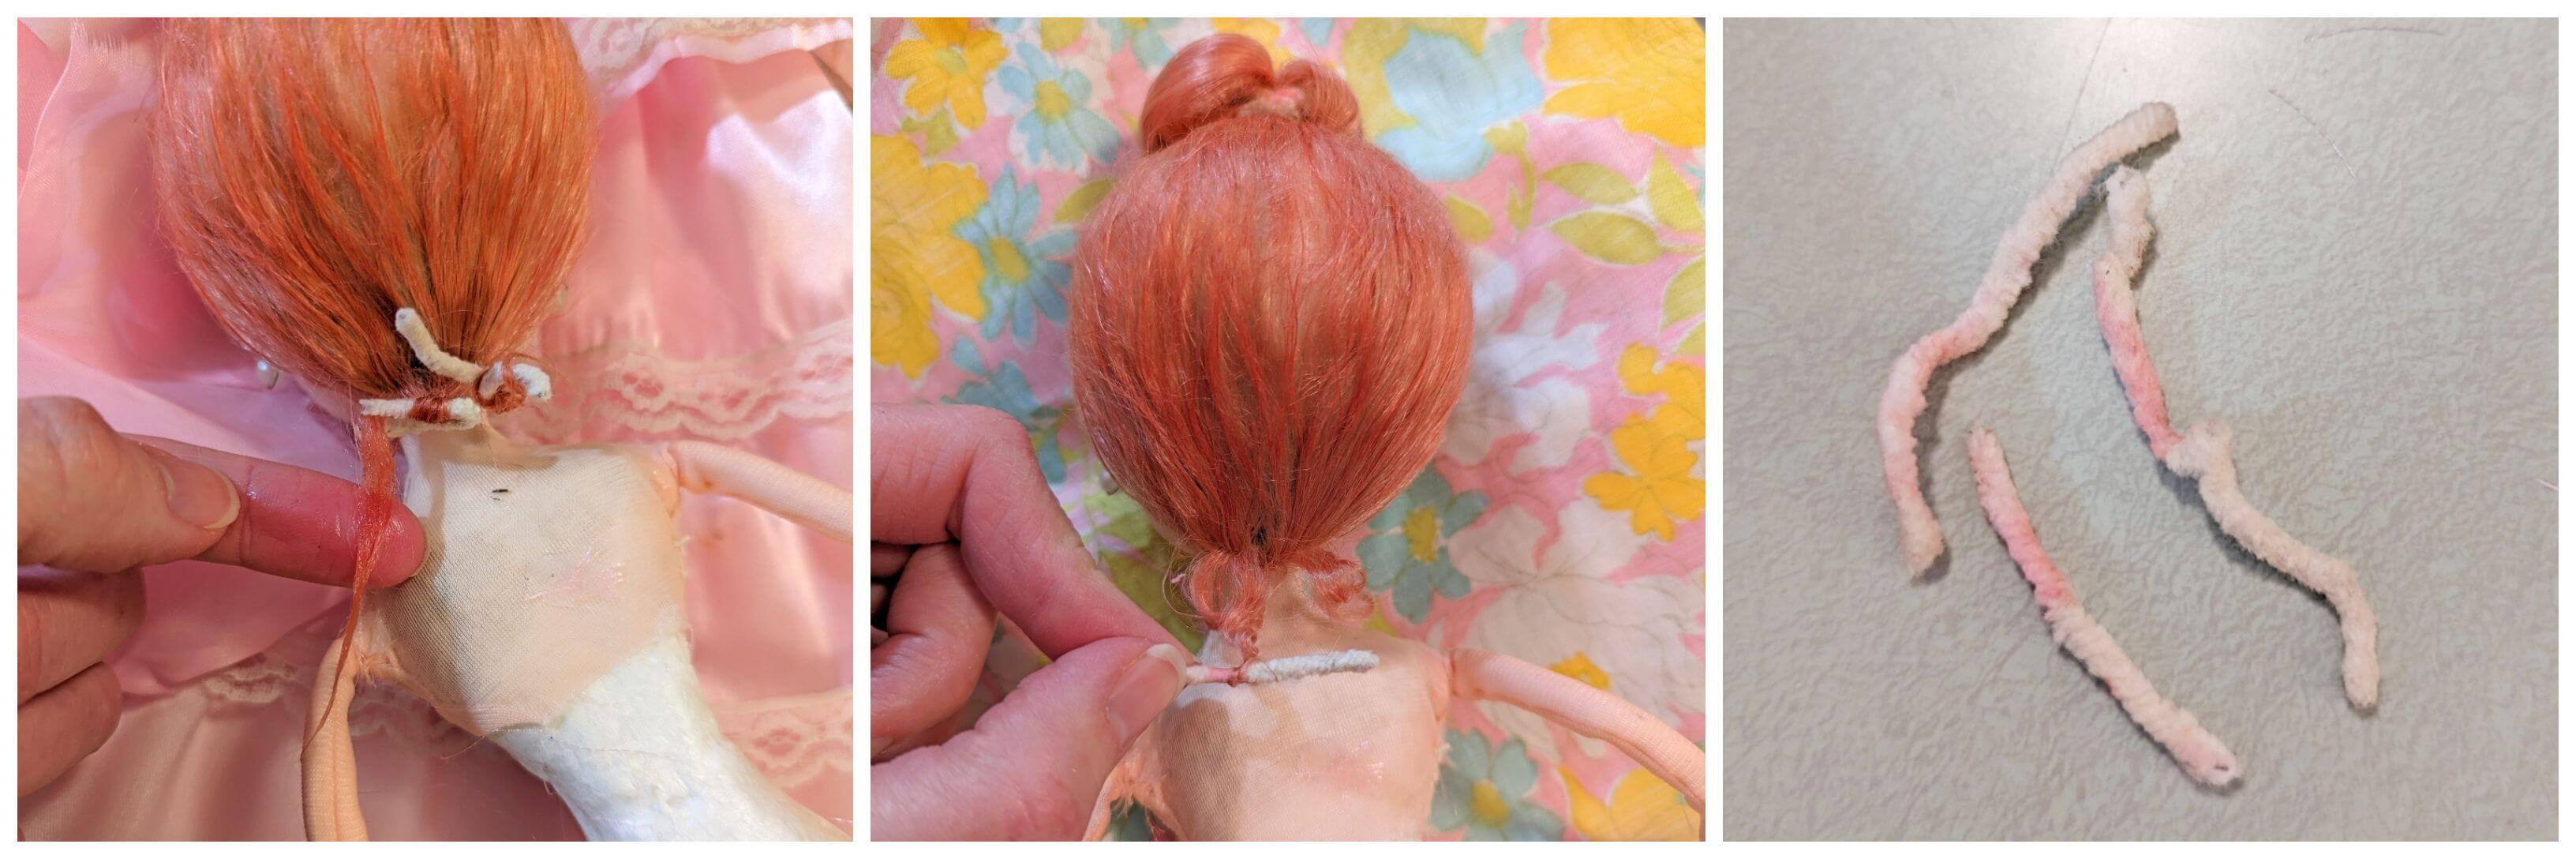 Upcycled Bradley Doll with Pink Dyed Hair